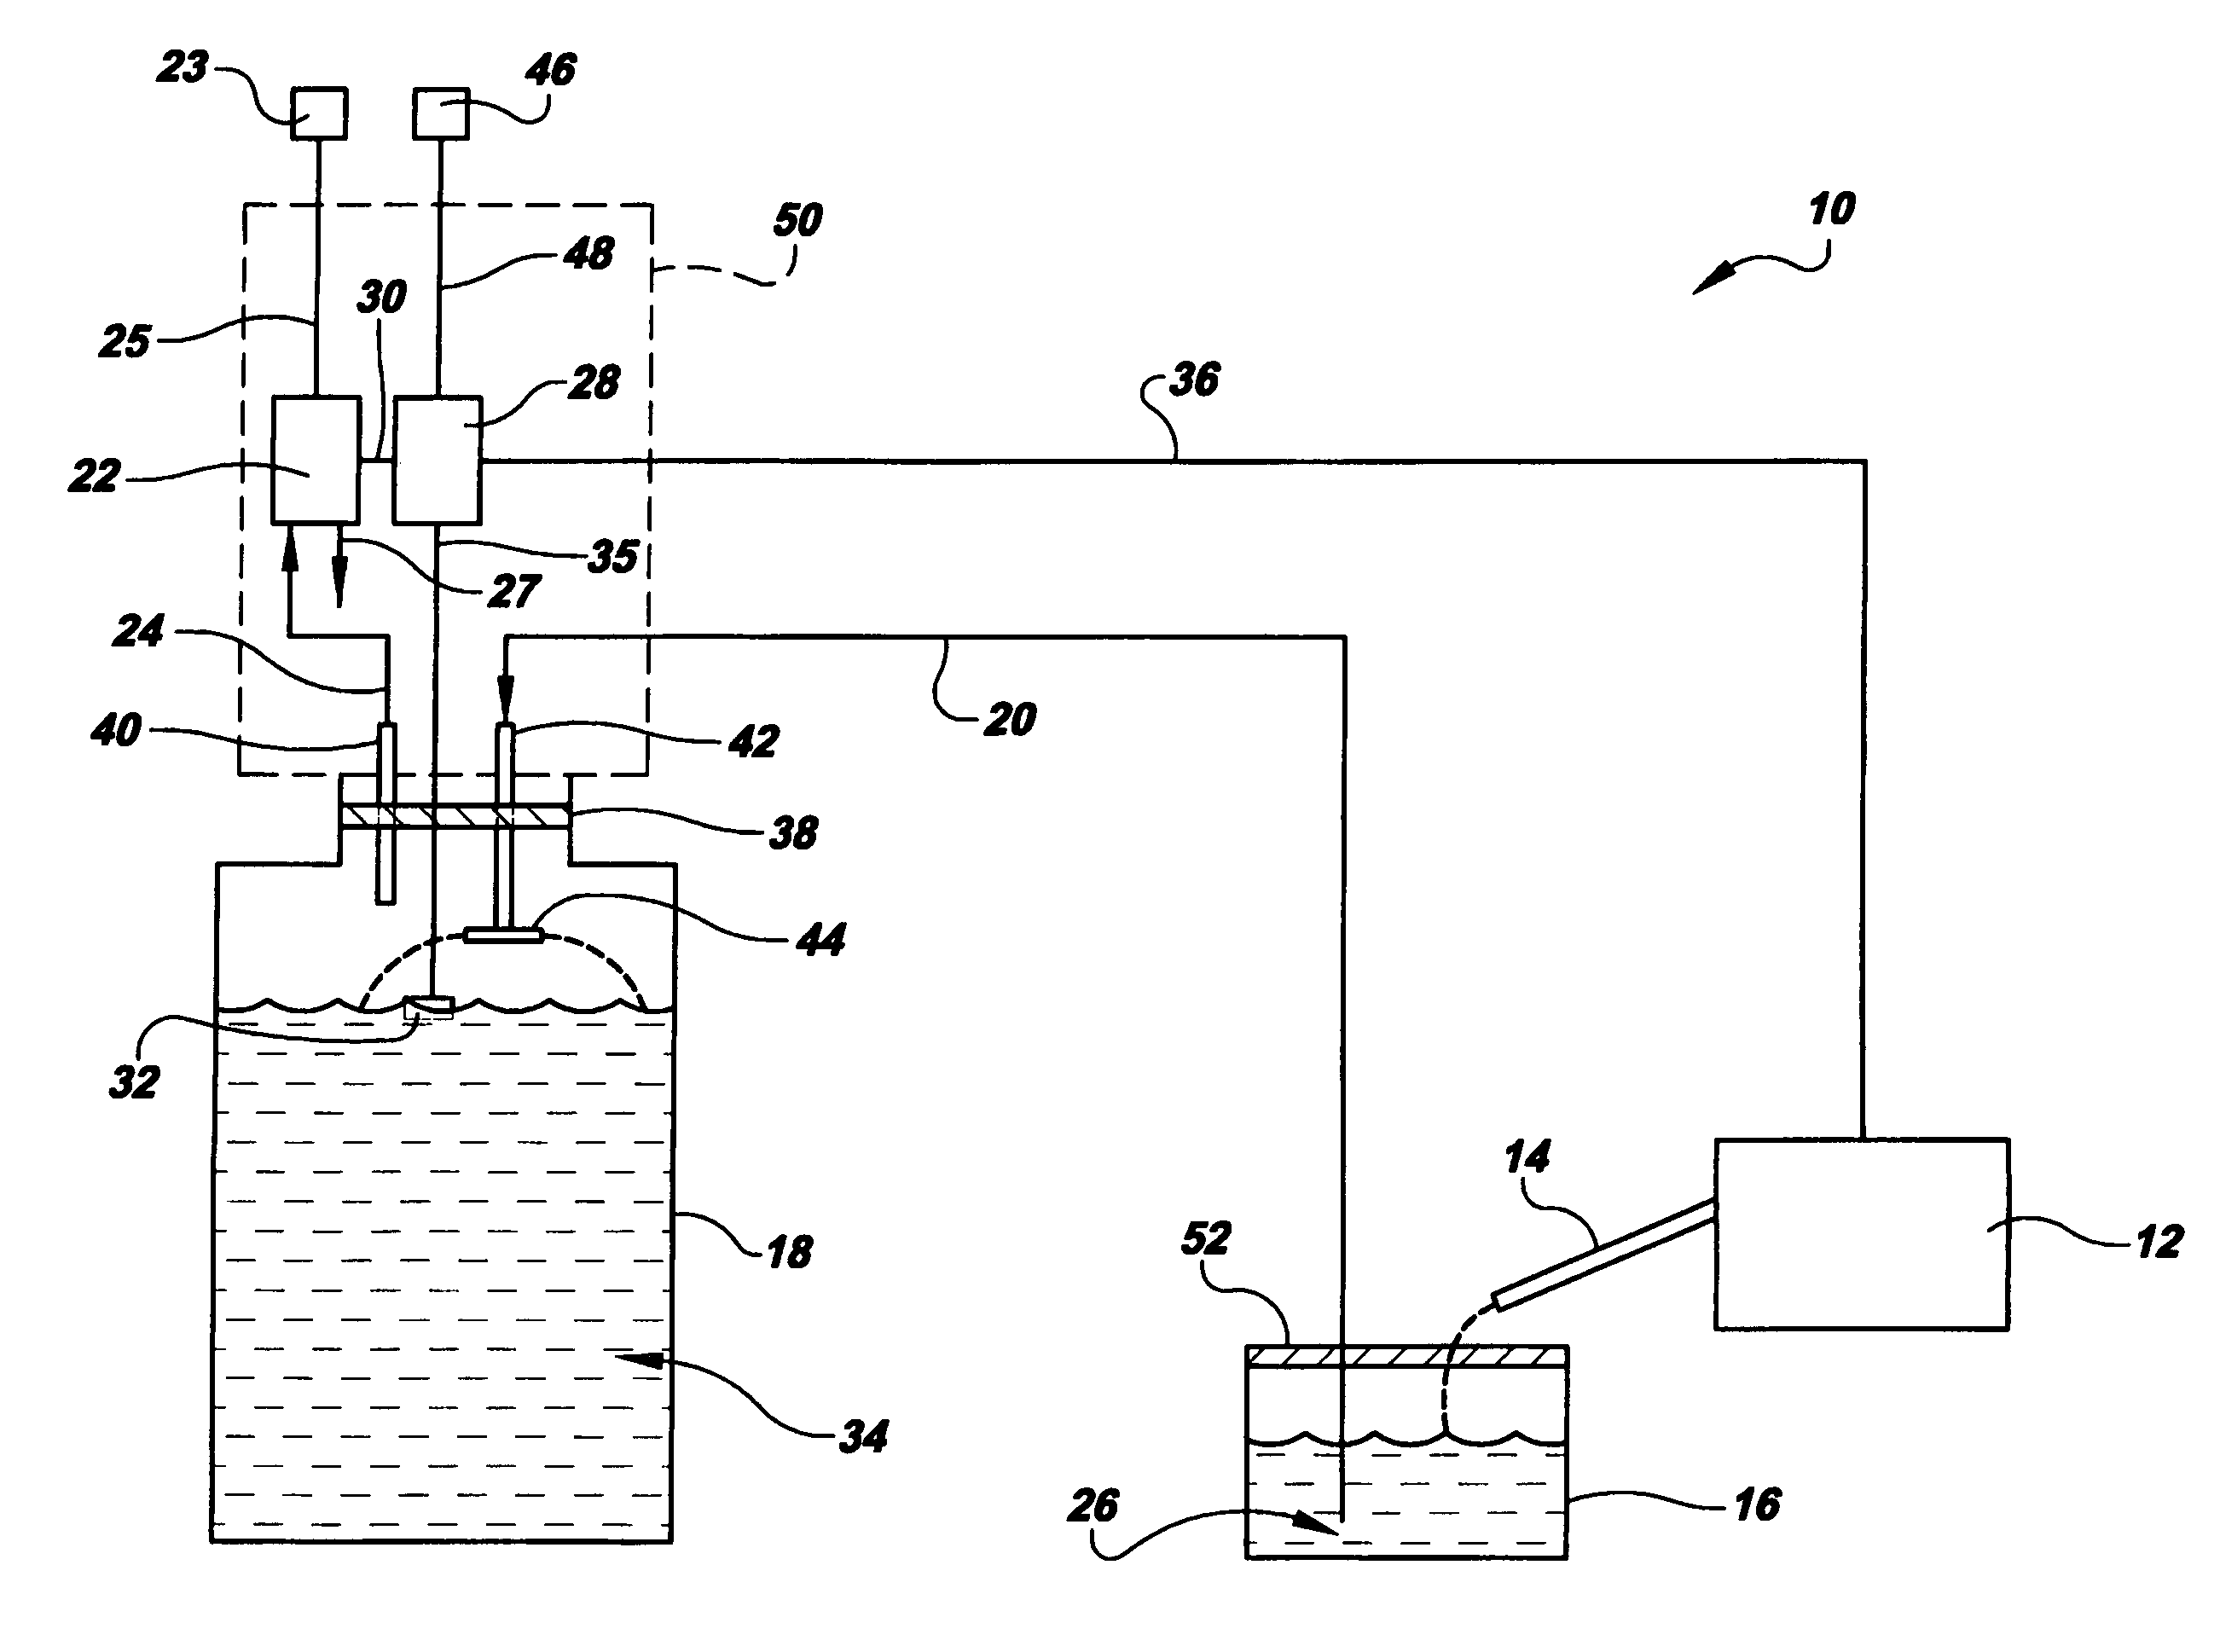 Vacuum separation, transport and collection system for immiscible liquids